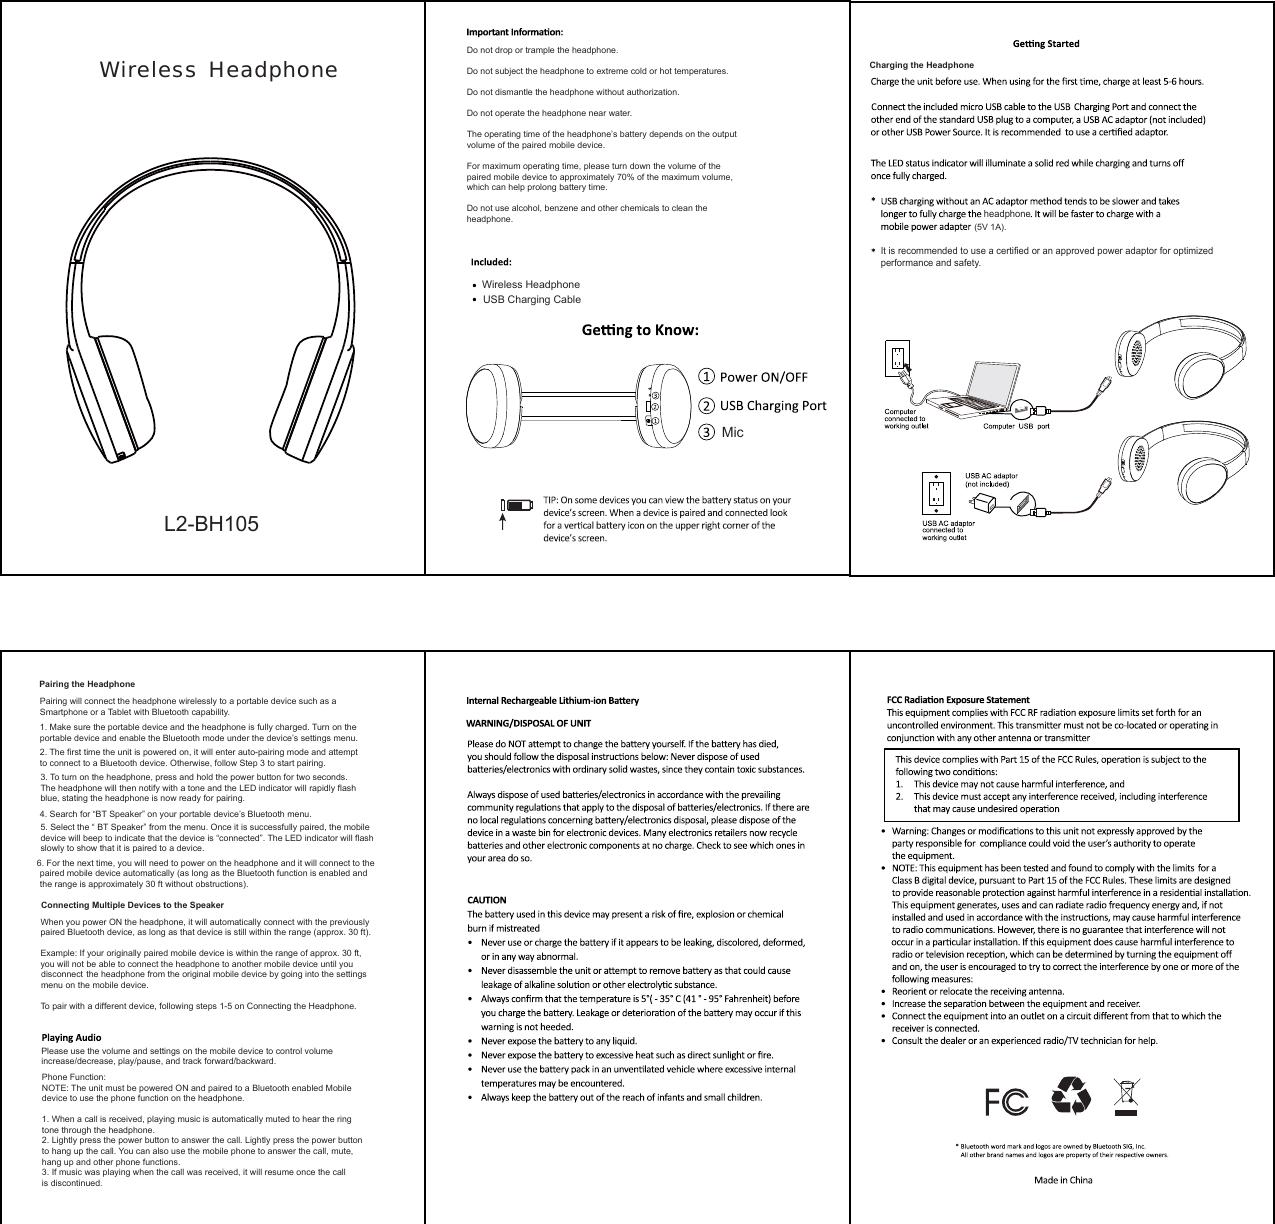   Wireless  HeadphoneL2-BH105Do not drop or trample the headphone.Do not subject the headphone to extreme cold or hot temperatures.Do not dismantle the headphone without authorization.Do not operate the headphone near water. The operating time of the headphone’s battery depends on the output volume of the paired mobile device.For maximum operating time, please turn down the volume of thepaired mobile device to approximately 70% of the maximum volume,which can help prolong battery time.Do not use alcohol, benzene and other chemicals to clean theheadphone.Pairing the HeadphonePairing will connect the headphone wirelessly to a portable device such as aSmartphone or a Tablet with Bluetooth capability.1. Make sure the portable device and the headphone is fully charged. Turn on theportable device and enable the Bluetooth mode under the device’s settings menu.2. The first time the unit is powered on, it will enter auto-pairing mode and attemptto connect to a Bluetooth device. Otherwise, follow Step 3 to start pairing.3. To turn on the headphone, press and hold the power button for two seconds.The headphone will then notify with a tone and the LED indicator will rapidly flashblue, stating the headphone is now ready for pairing.4. Search for “BT Speaker” on your portable device’s Bluetooth menu.5. Select the “ BT Speaker” from the menu. Once it is successfully paired, the mobiledevice will beep to indicate that the device is “connected”. The LED indicator will flashslowly to show that it is paired to a device.6. For the next time, you will need to power on the headphone and it will connect to thepaired mobile device automatically (as long as the Bluetooth function is enabled and the range is approximately 30 ft without obstructions).Connecting Multiple Devices to the SpeakerWhen you power ON the headphone, it will automatically connect with the previouslypaired Bluetooth device, as long as that device is still within the range (approx. 30 ft).Example: If your originally paired mobile device is within the range of approx. 30 ft, you will not be able to connect the headphone to another mobile device until you the headphone from the original mobile device by going into the settings  menu on the mobile device.To pair with a different device, following steps 1-5 on Connecting the Headphone.Please use the volume and settings on the mobile device to control volumeincrease/decrease, play/pause, and track forward/backward.Phone Function:NOTE: The unit must be powered ON and paired to a Bluetooth enabled Mobiledevice to use the phone function on the headphone.1. When a call is received, playing music is automatically muted to hear the ringtone through the headphone.2. Lightly press the power button to answer the call. Lightly press the power buttonto hang up the call. You can also use the mobile phone to answer the call, mute, hang up and other phone functions.3. If music was playing when the call was received, it will resume once the callis discontinued.MicWireless HeadphoneUSB Charging CableCharging the Headphone(5V 1A).headphoneIt is recommended to use a certified or an approved power adaptor for optimizedperformance and safety.disconnect